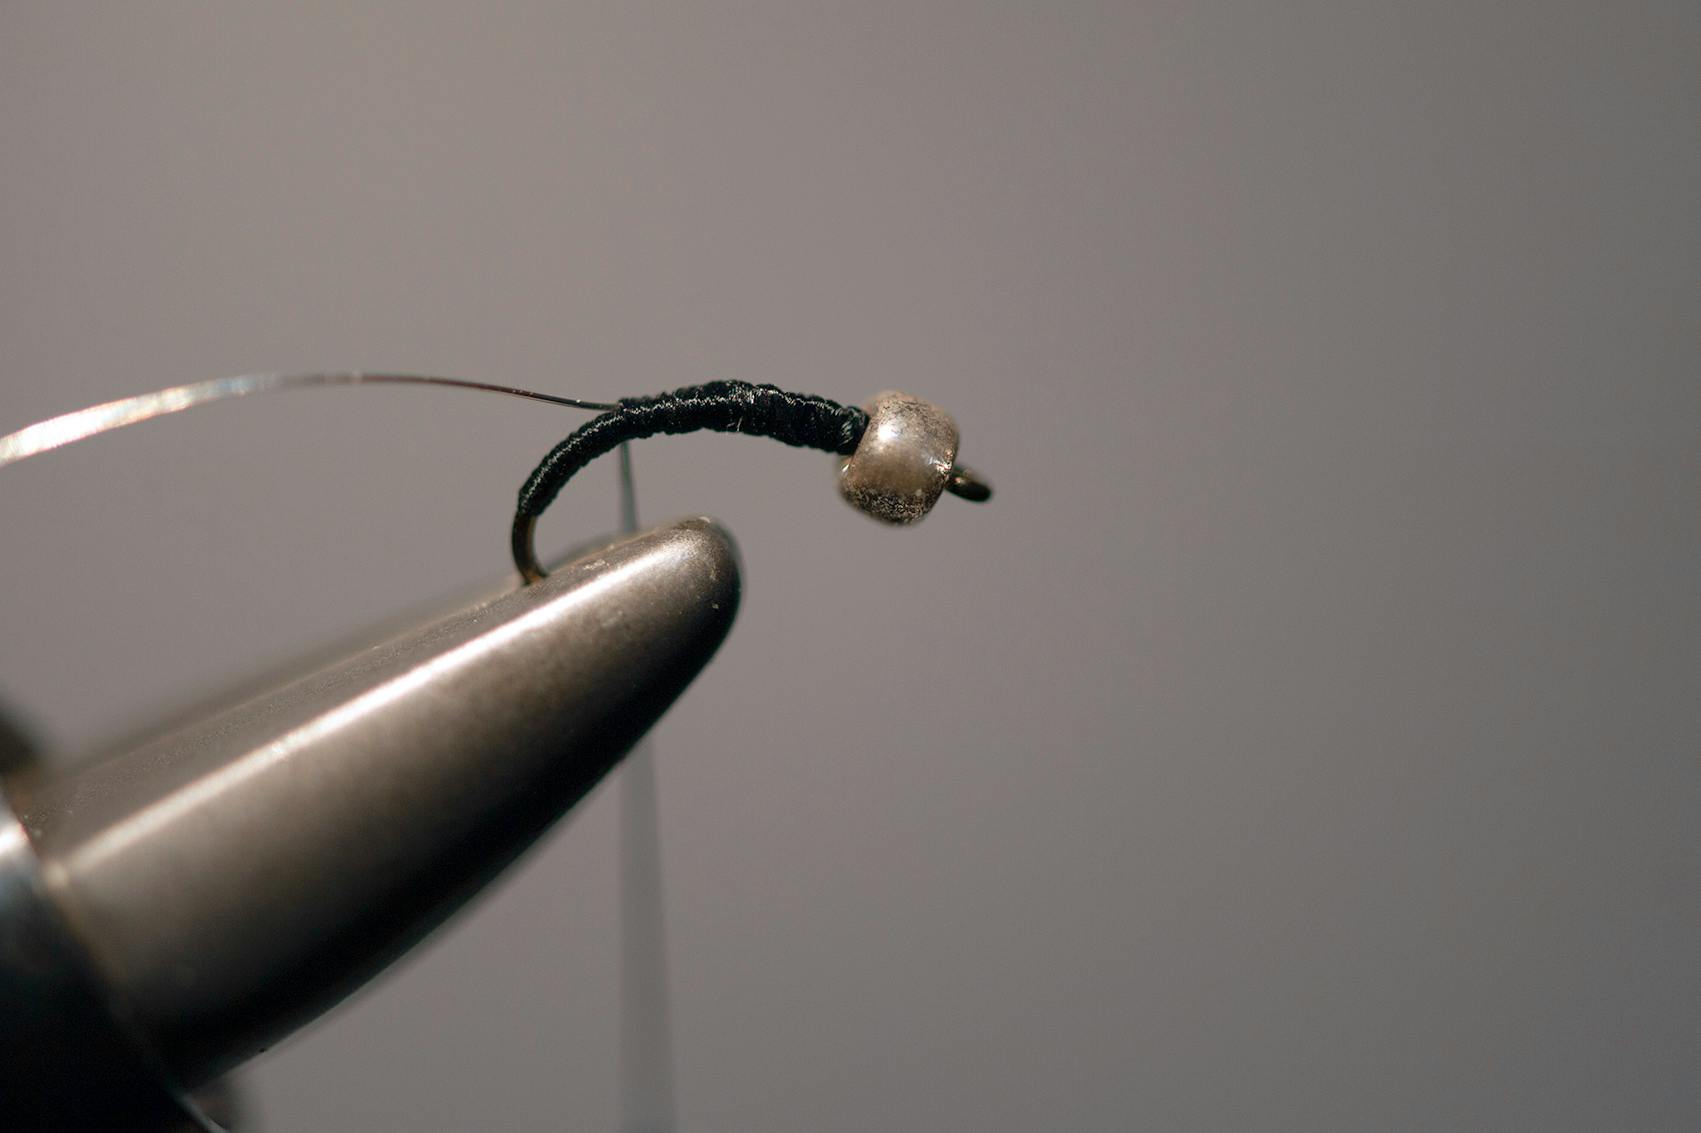 The same hook and bead from above are pictured in the vice jaws with more thread around the hook.